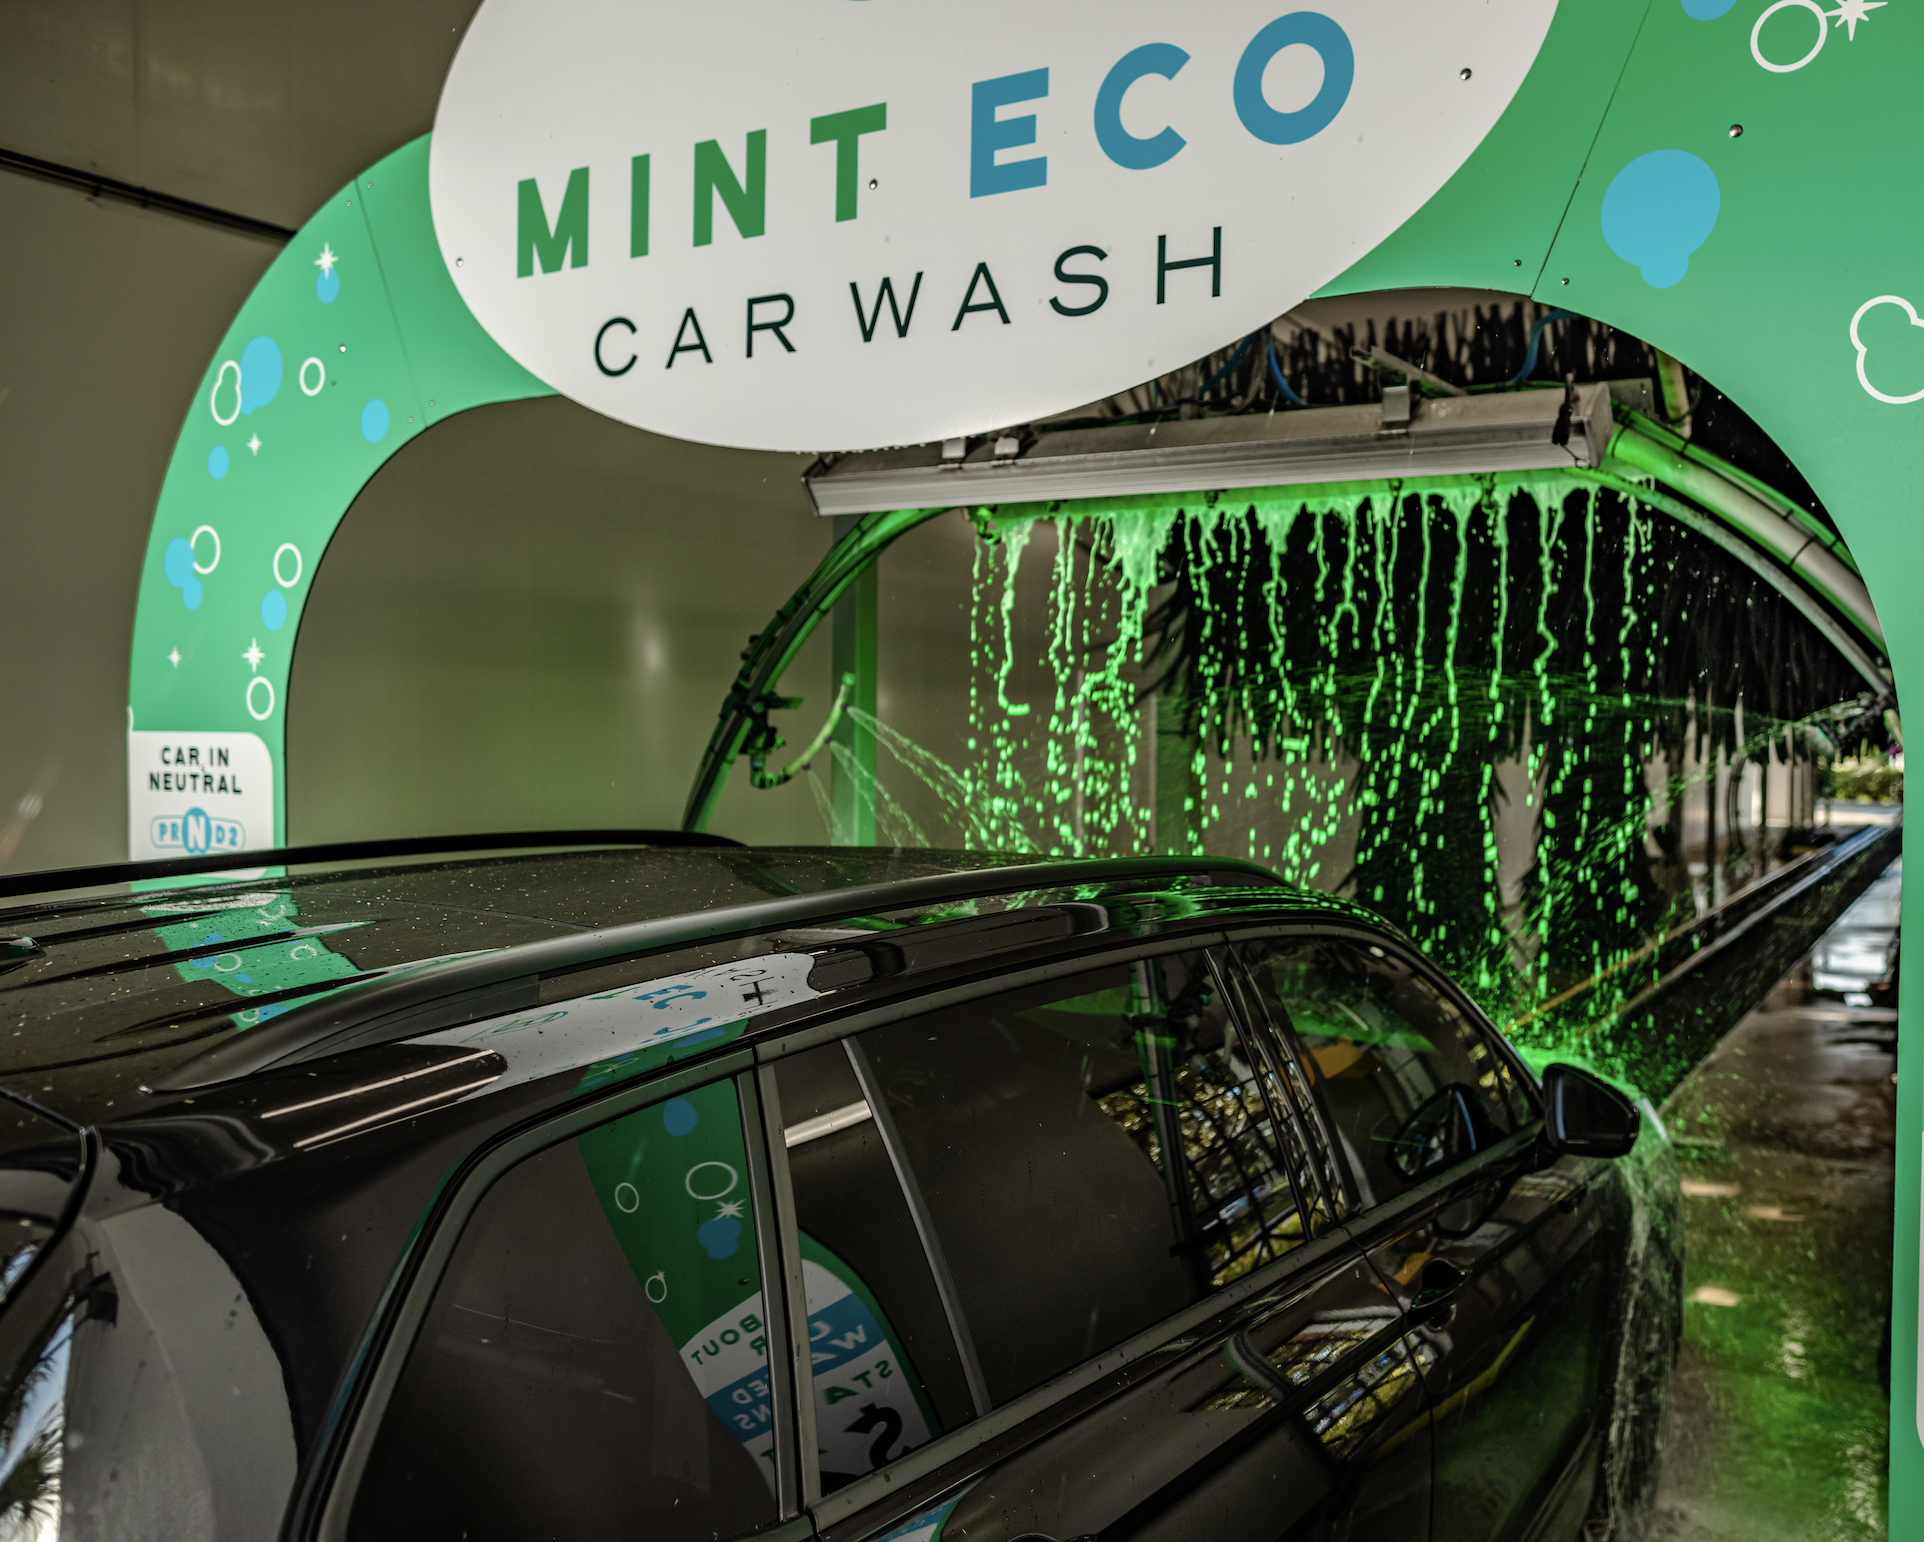 Mint Eco's Haunted Car Wash event is free for everyone, including a free car wash. Donations are optional and will go directly to benefit the West Palm Beach Police Fund.